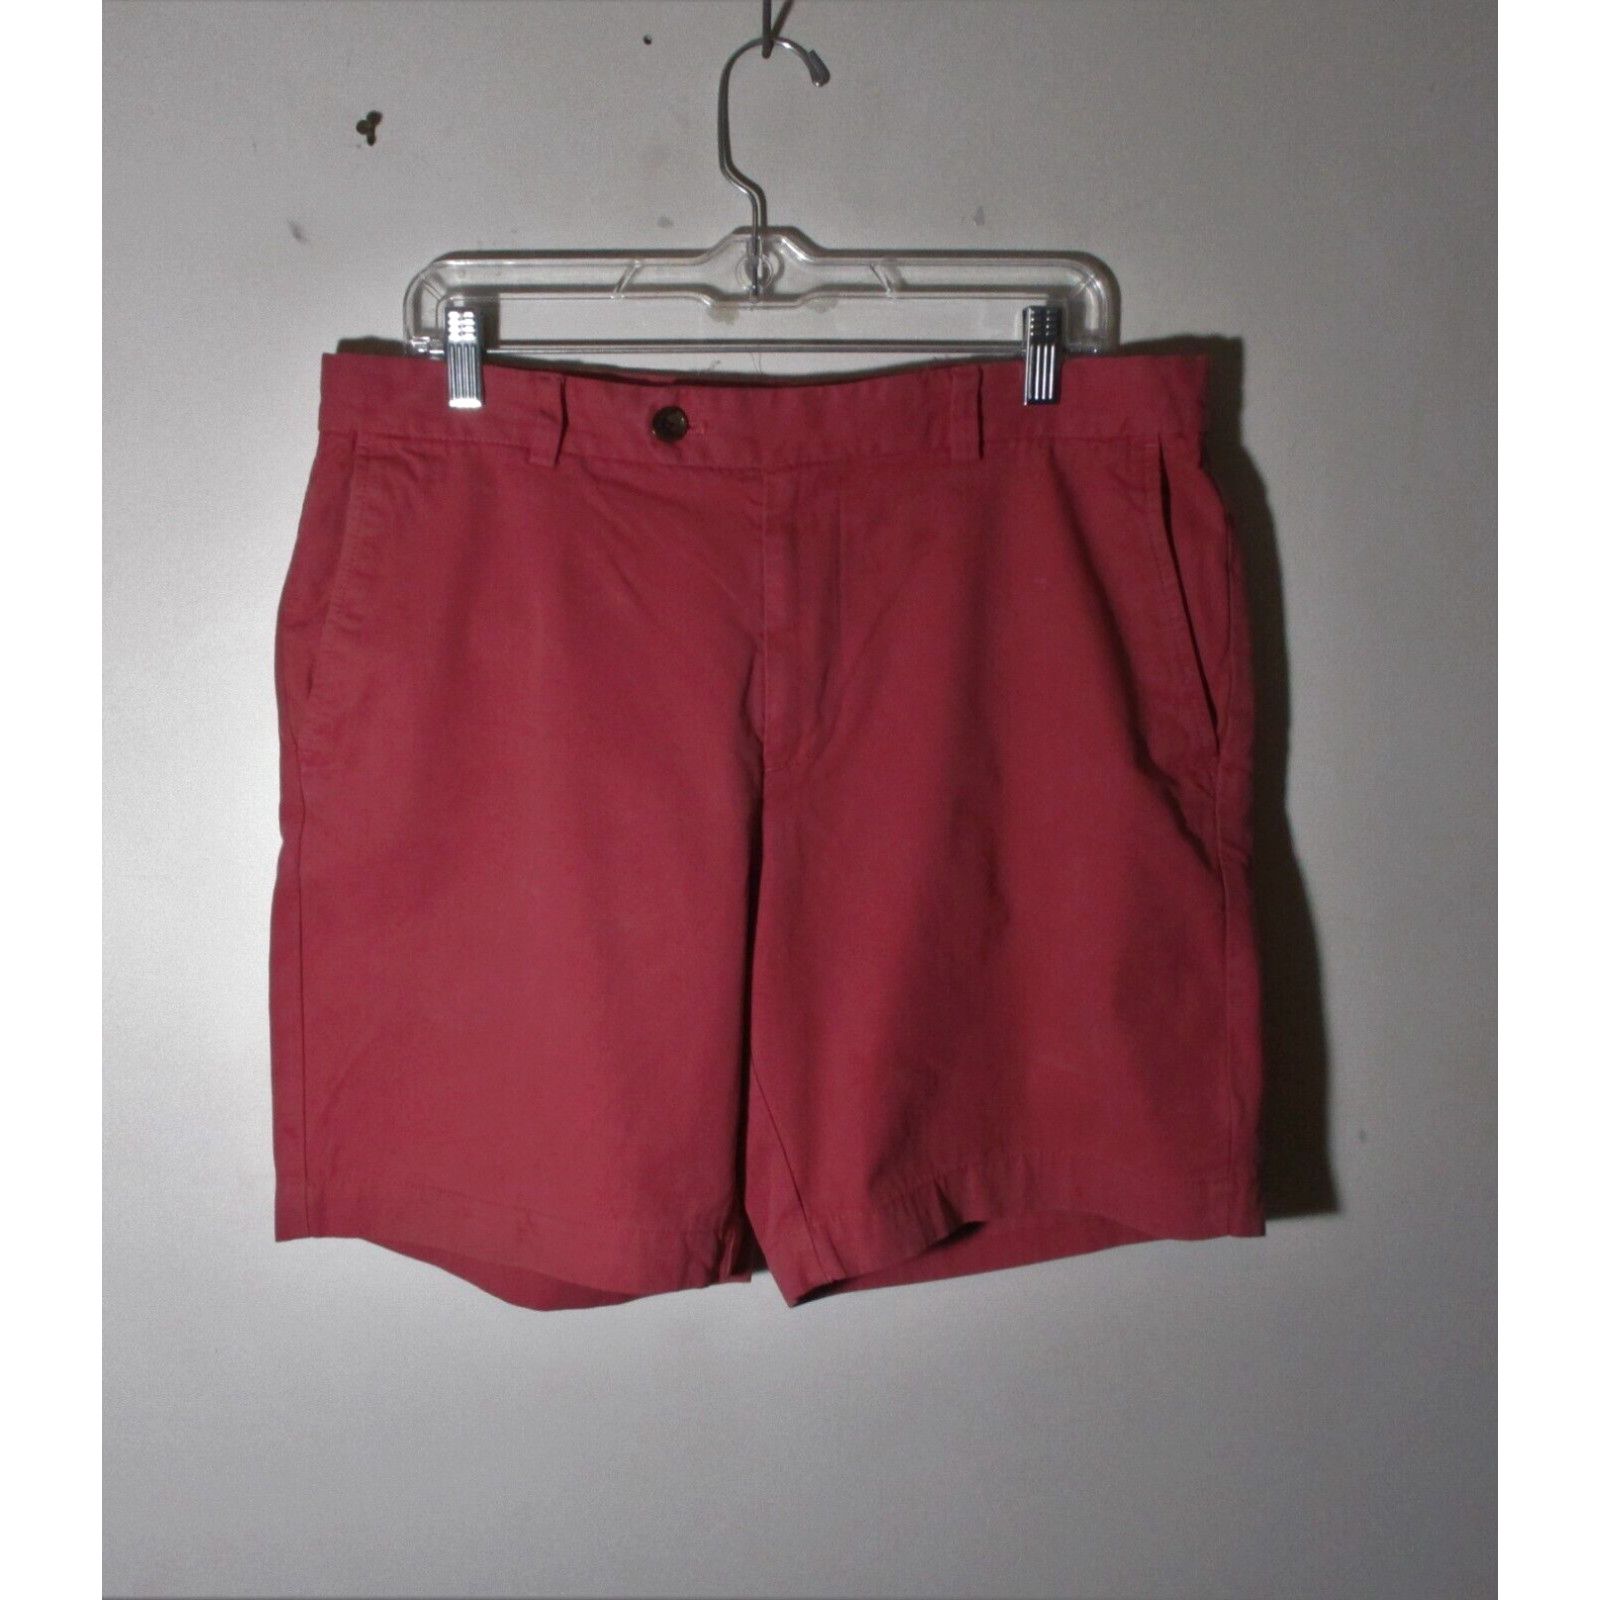 Polo Ralph Lauren Shorts Men 36 Relaxed Fit Chino Flat Front Salmon Pink w  Logo